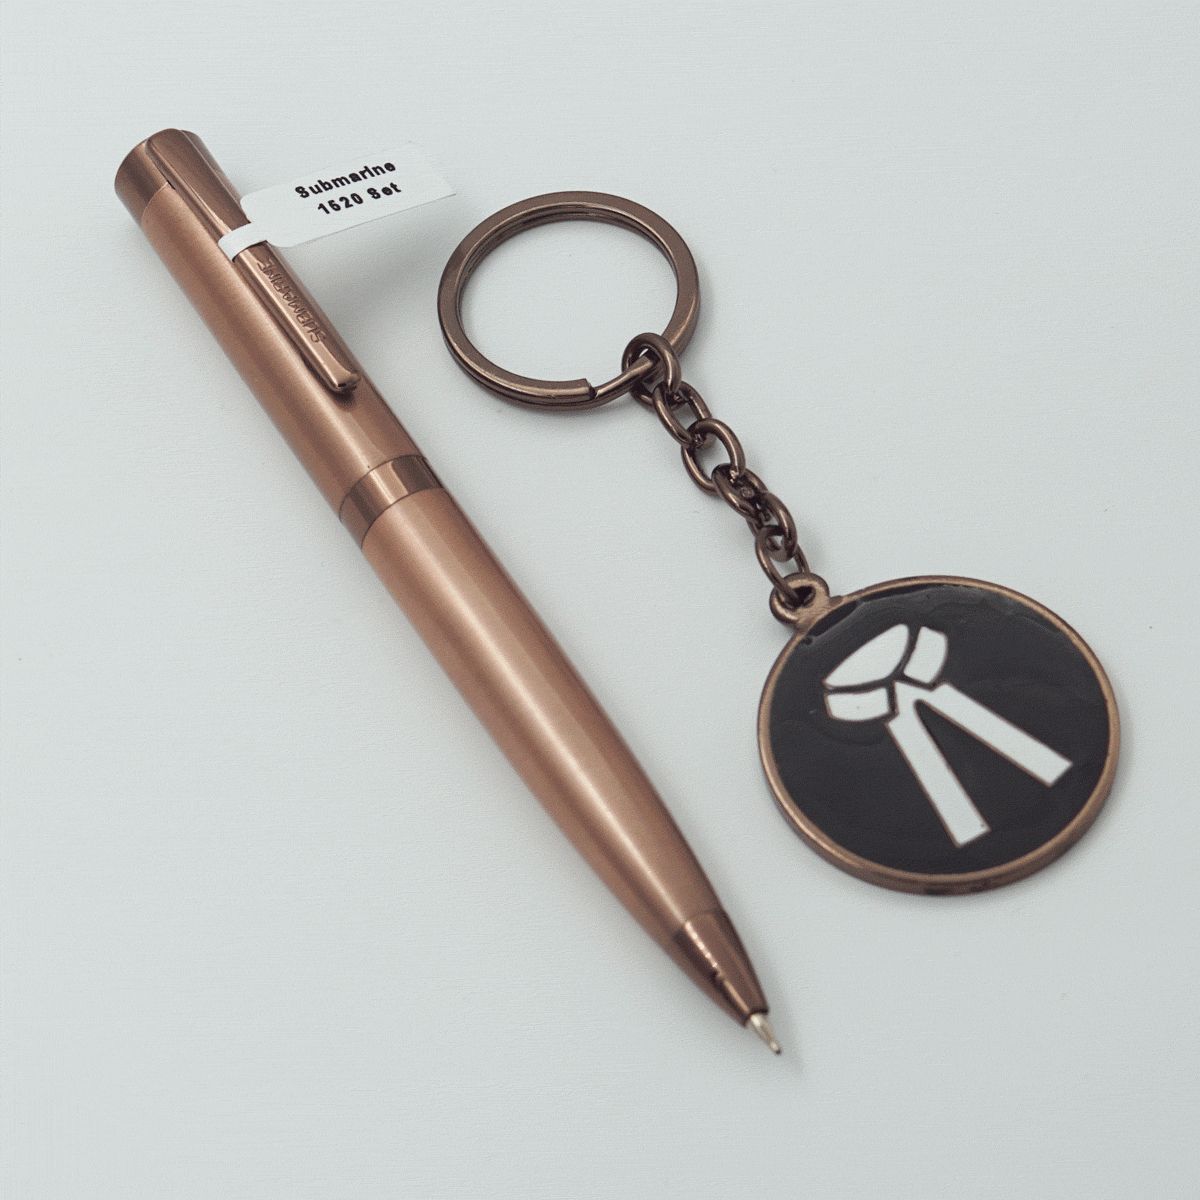 Submarine 1520 Copper Color Body With Cap Fine Tip Twist Type Ball Pen And Advocate Symbol Keychain Set SKU 23707